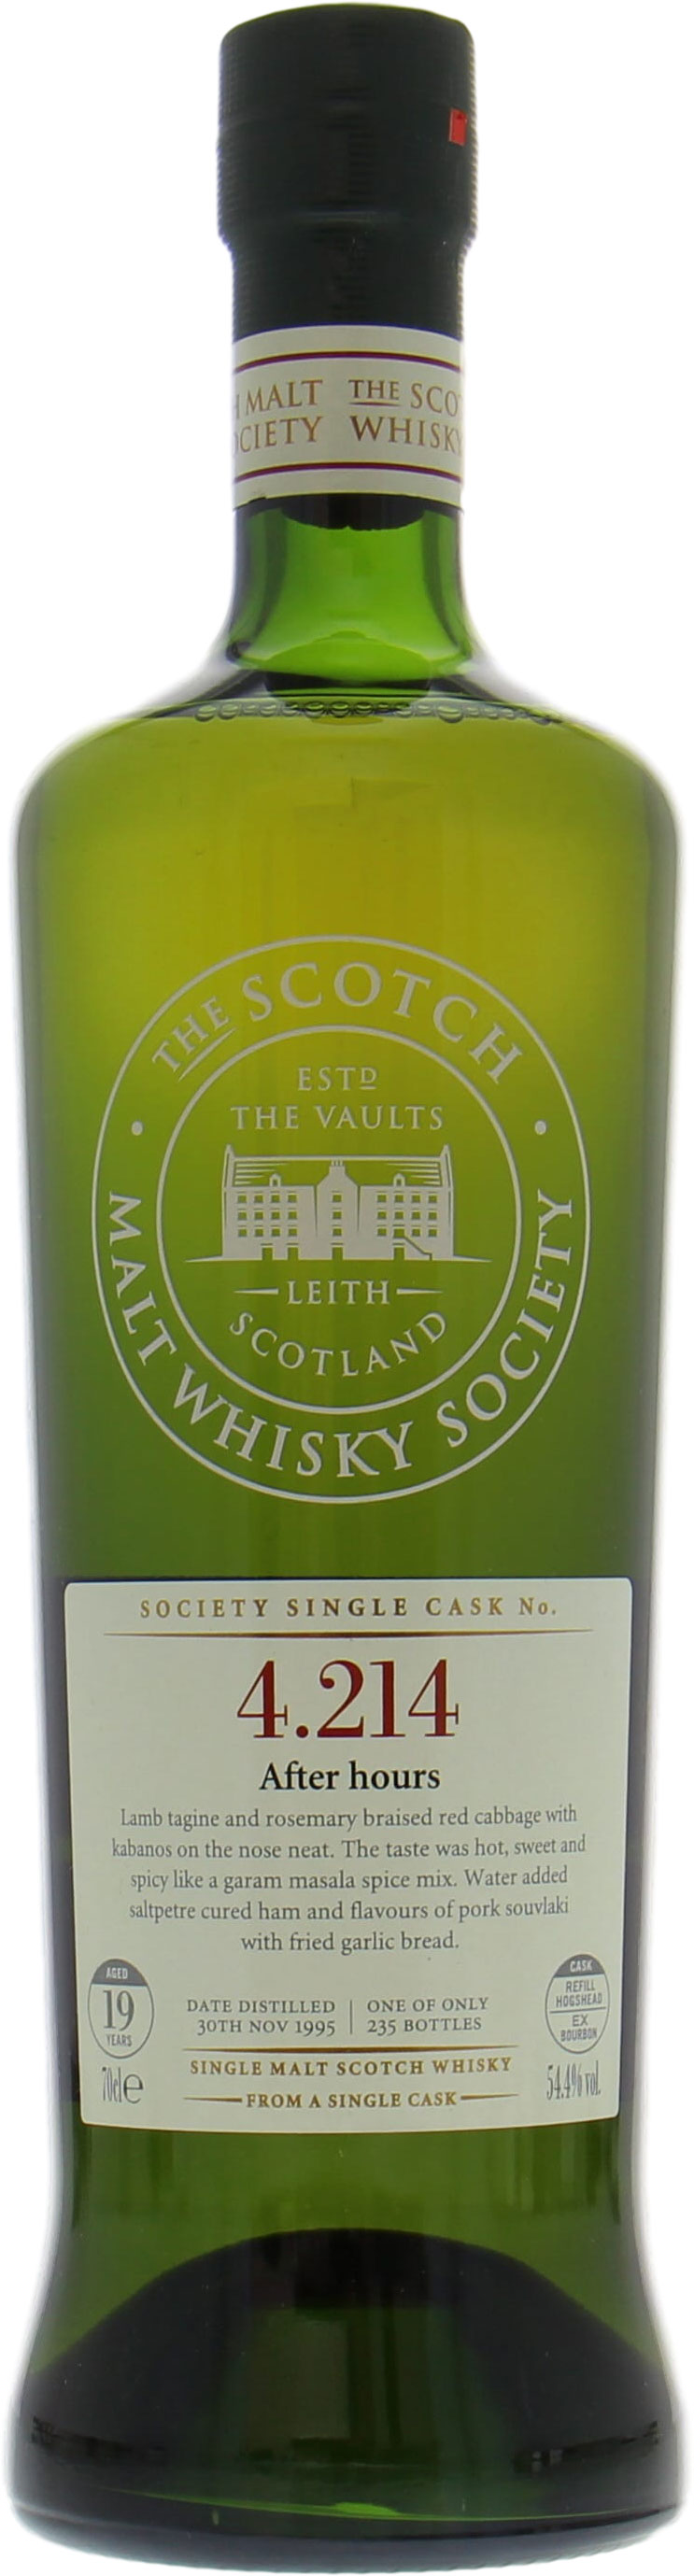 Highland Park - 19 Years Old SMWS 4.214 After Hours 54.5.% 1995 Perfect